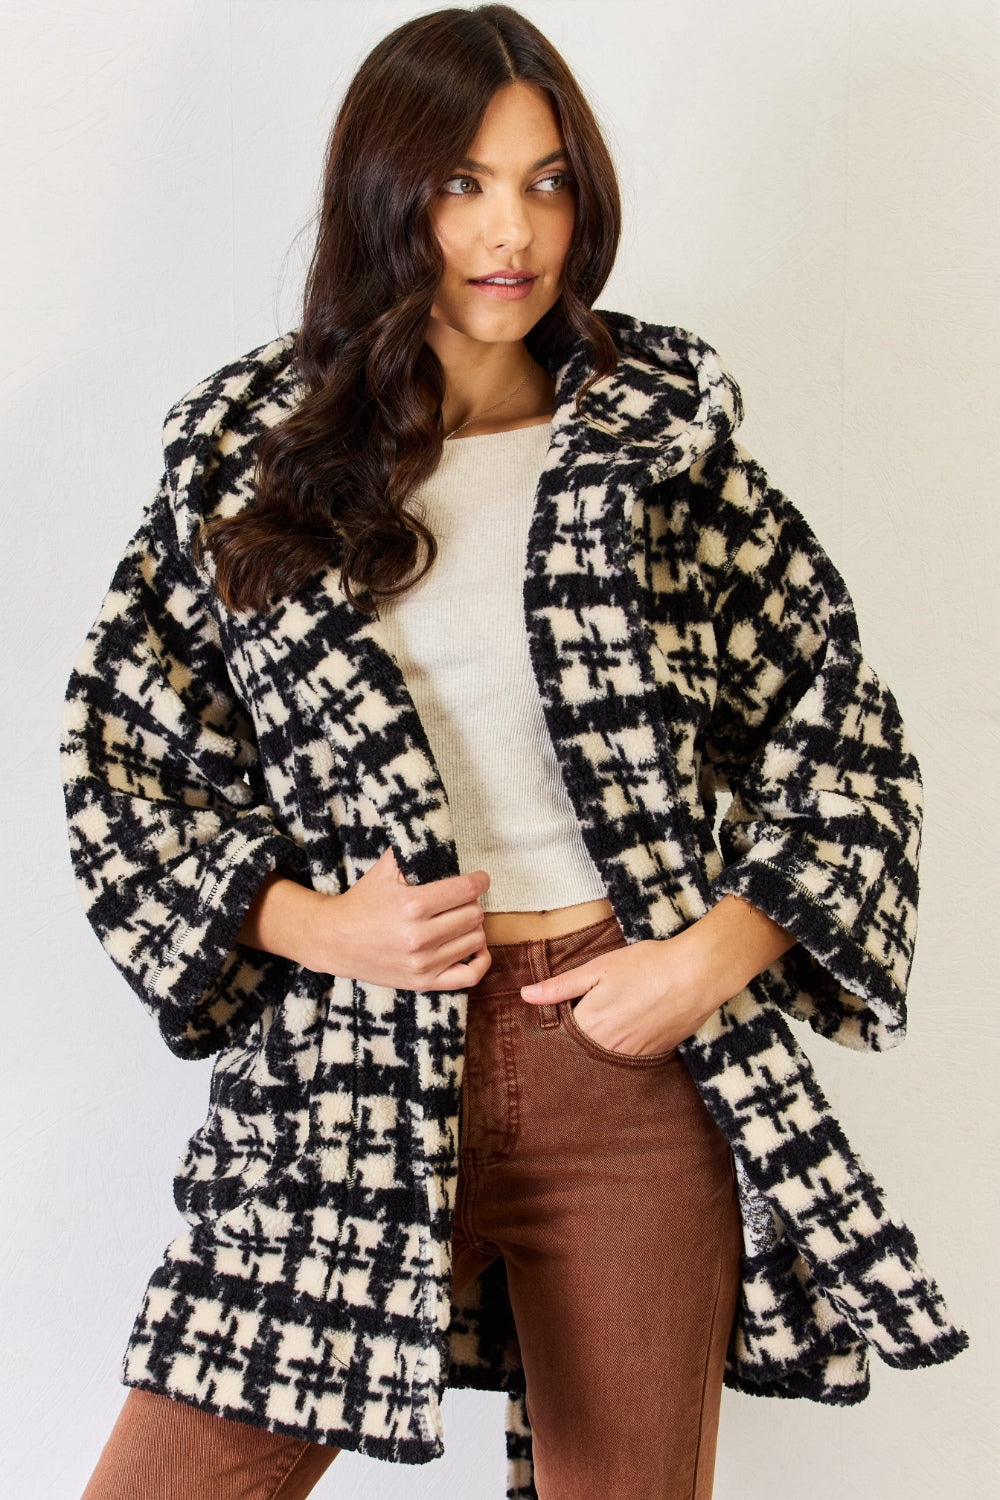 Fuzzy Jacket Black and White Pattern Plaid Waist Tie Hooded Women's Coat